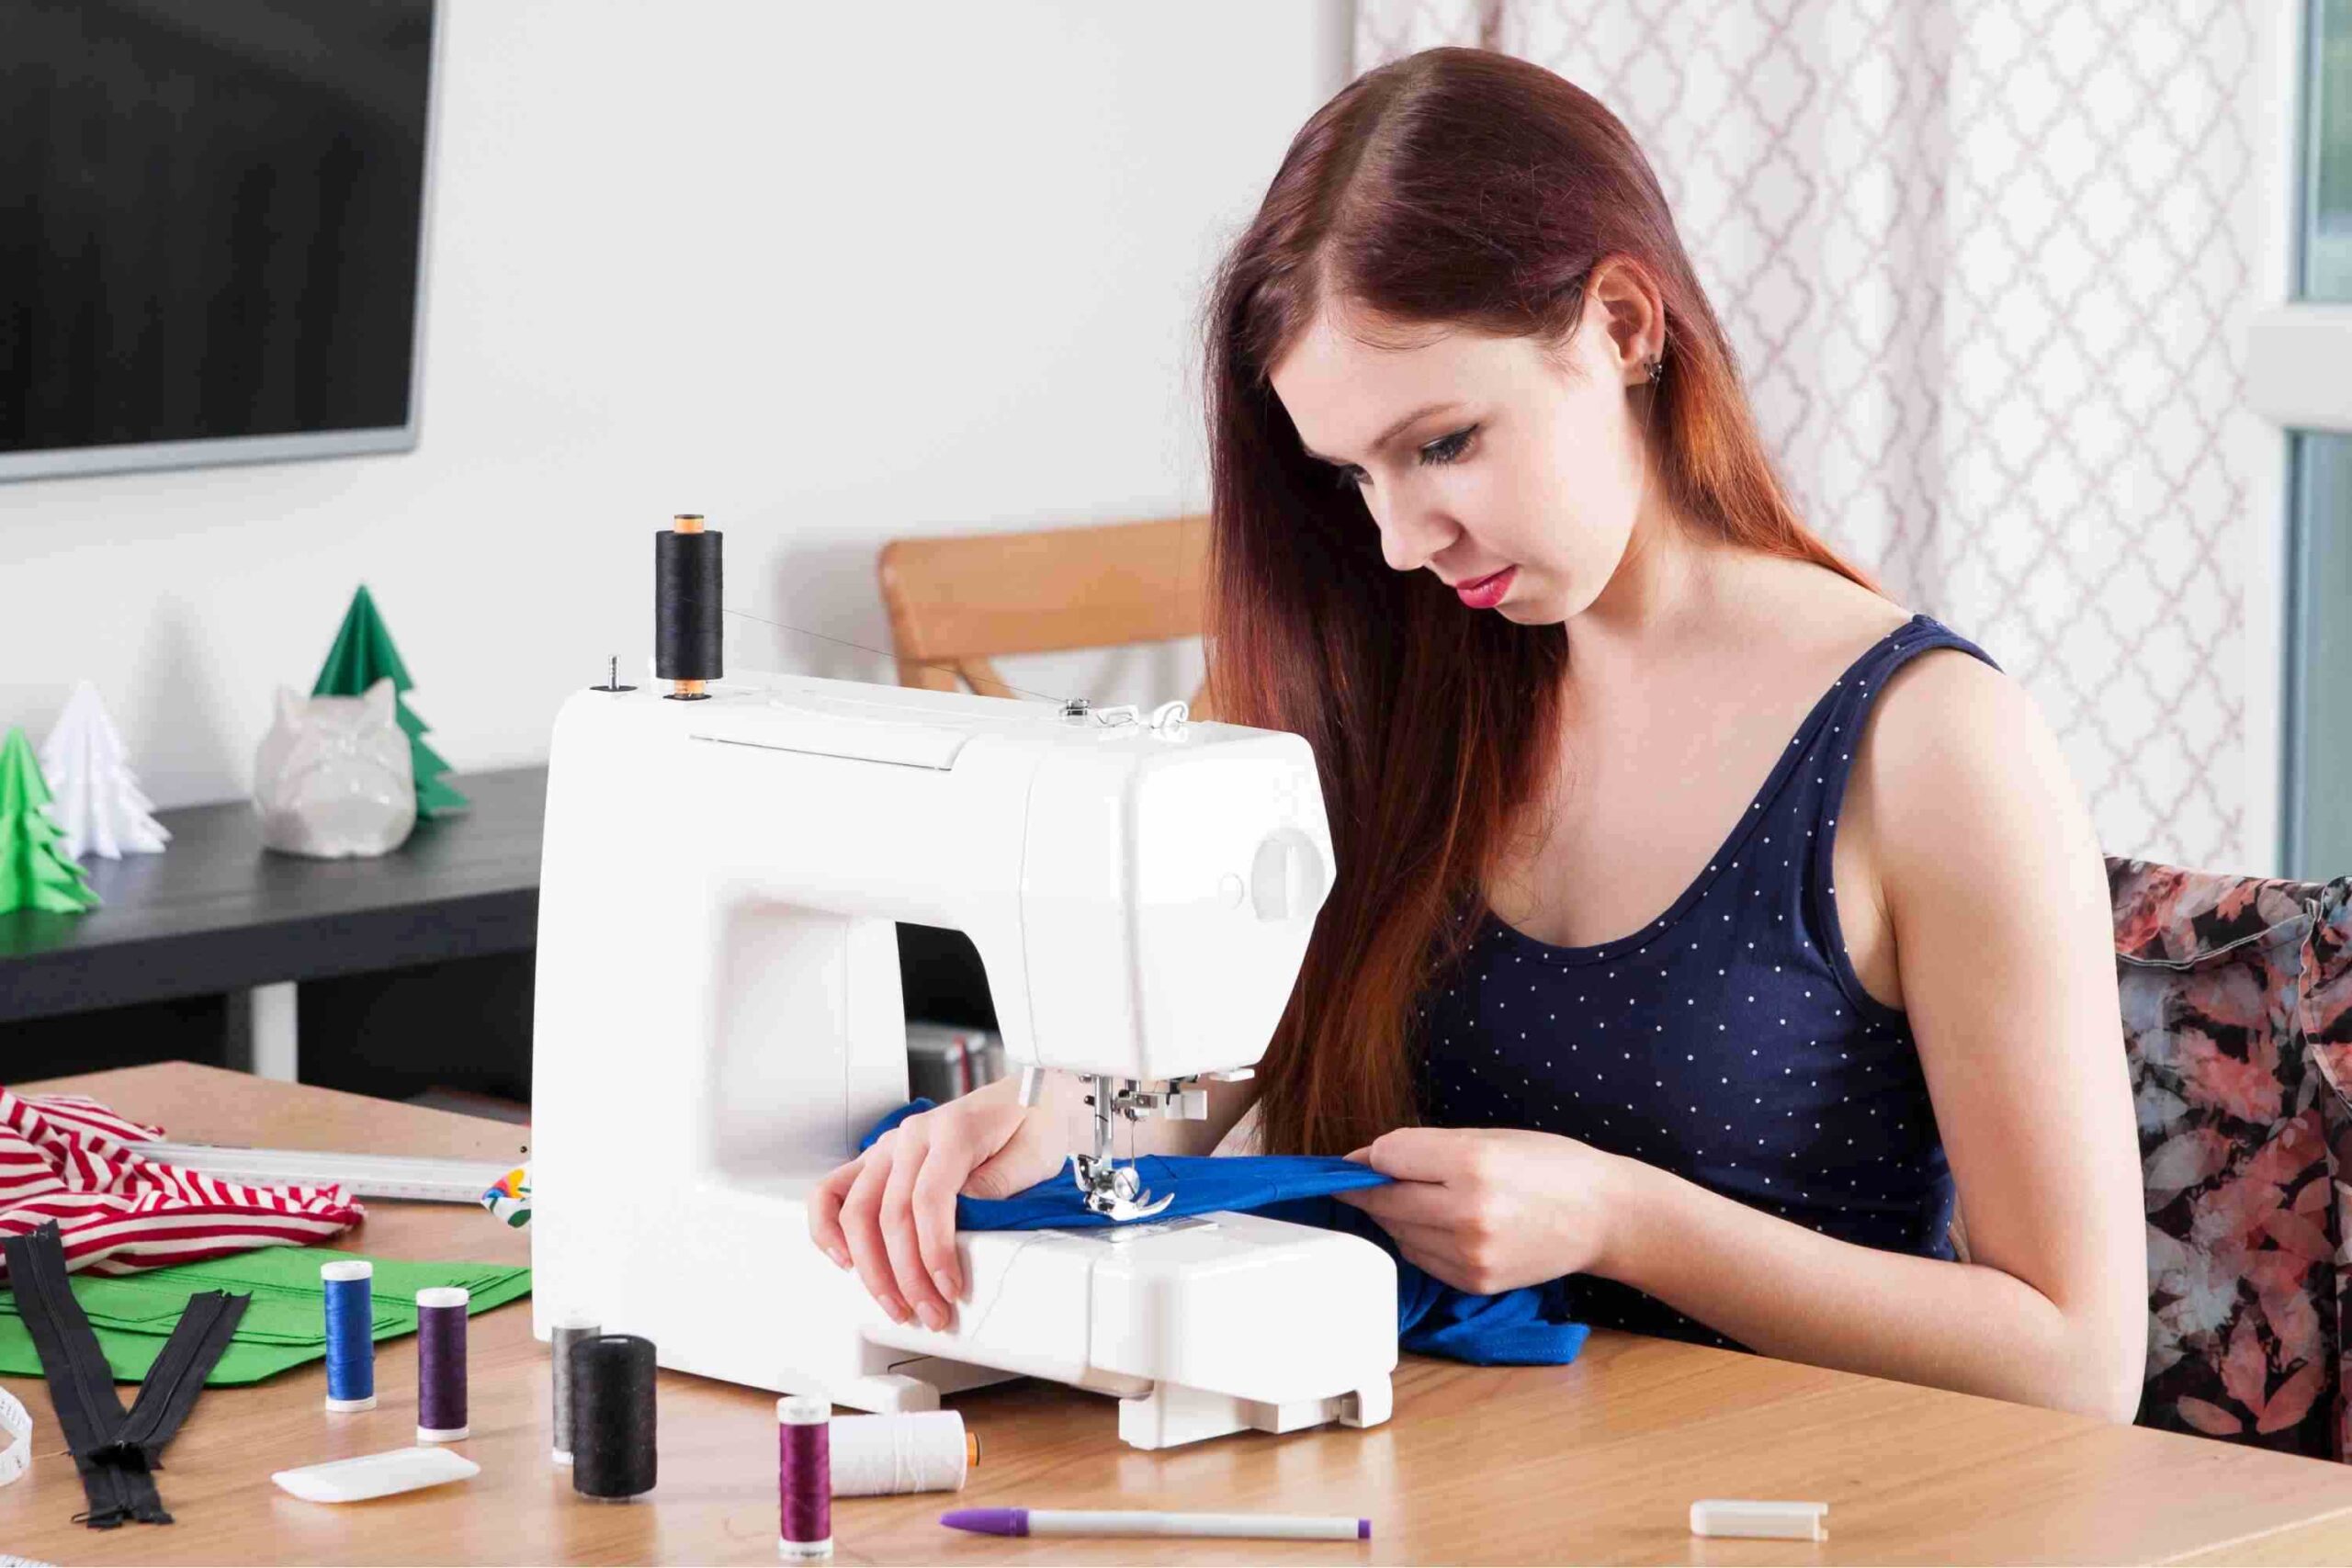 HOW TO START SEWING YOUR OWN CLOTHES (A COMPLETE BEGINNER’S GUIDE TO SEWING)